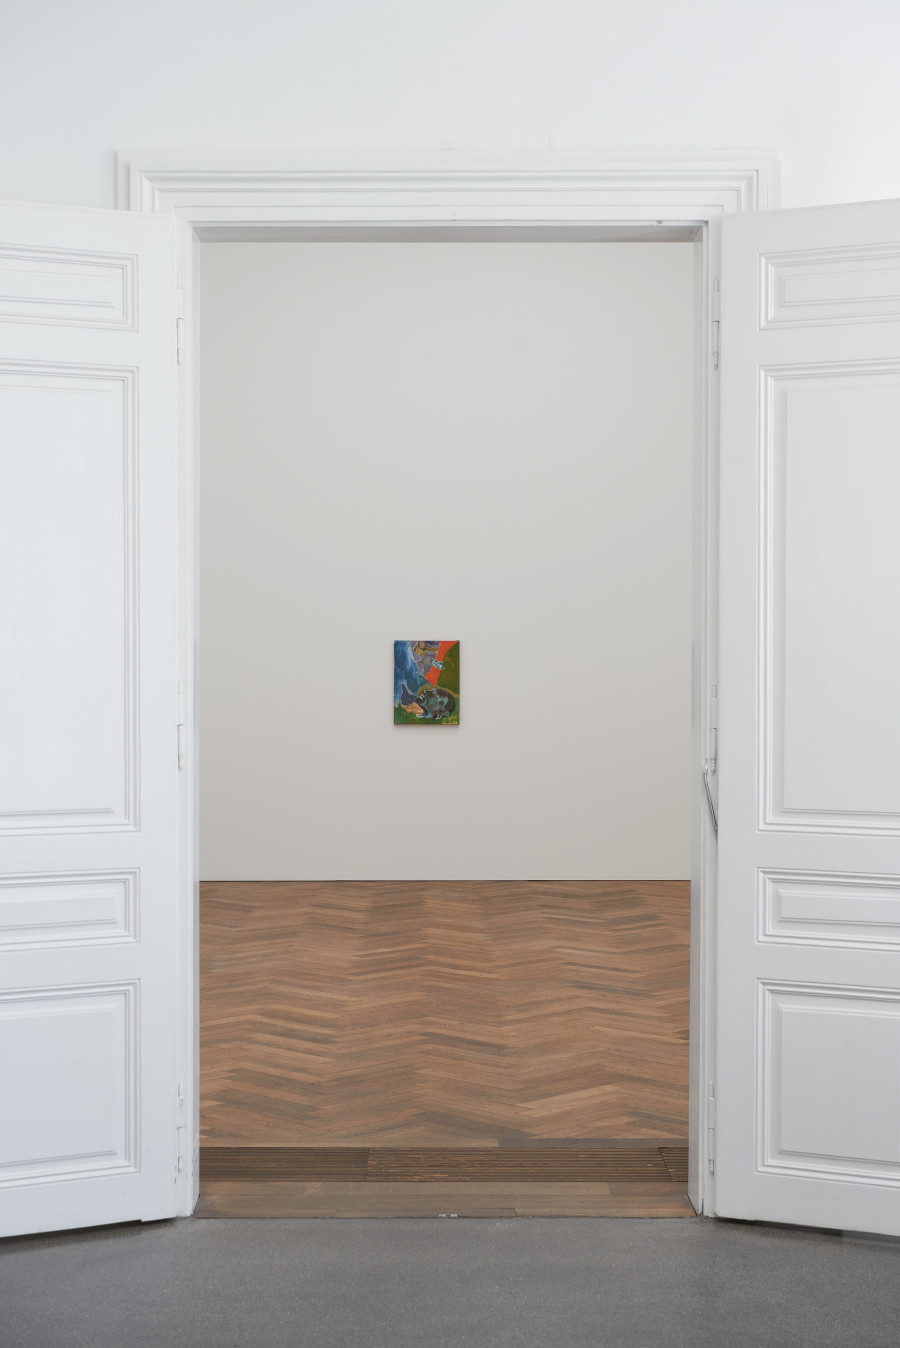 Installation view, Michael Armitage, You, Who Are Still Alive, Kunsthalle Basel, 2022, view on, Head of Koitalel, 2021. Photo: Philipp Hänger / Kunsthalle Basel. All works, unless otherwise mentioned, courtesy of the artist and White Cube. Cave, 2021, Courtesy of the artist and Pinault Collection